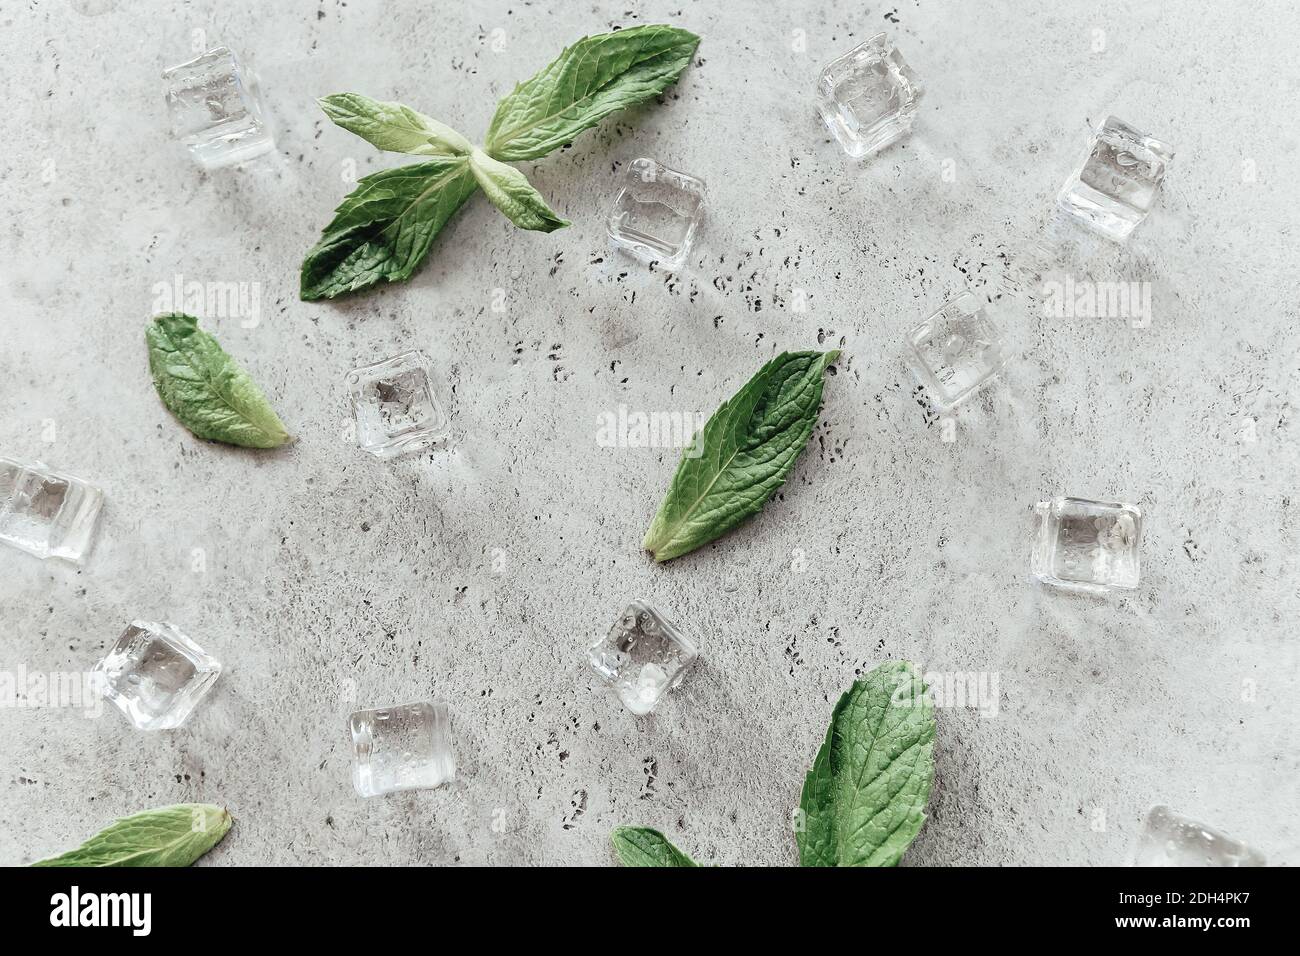 Mint leaves and ice cubes on table Stock Photo